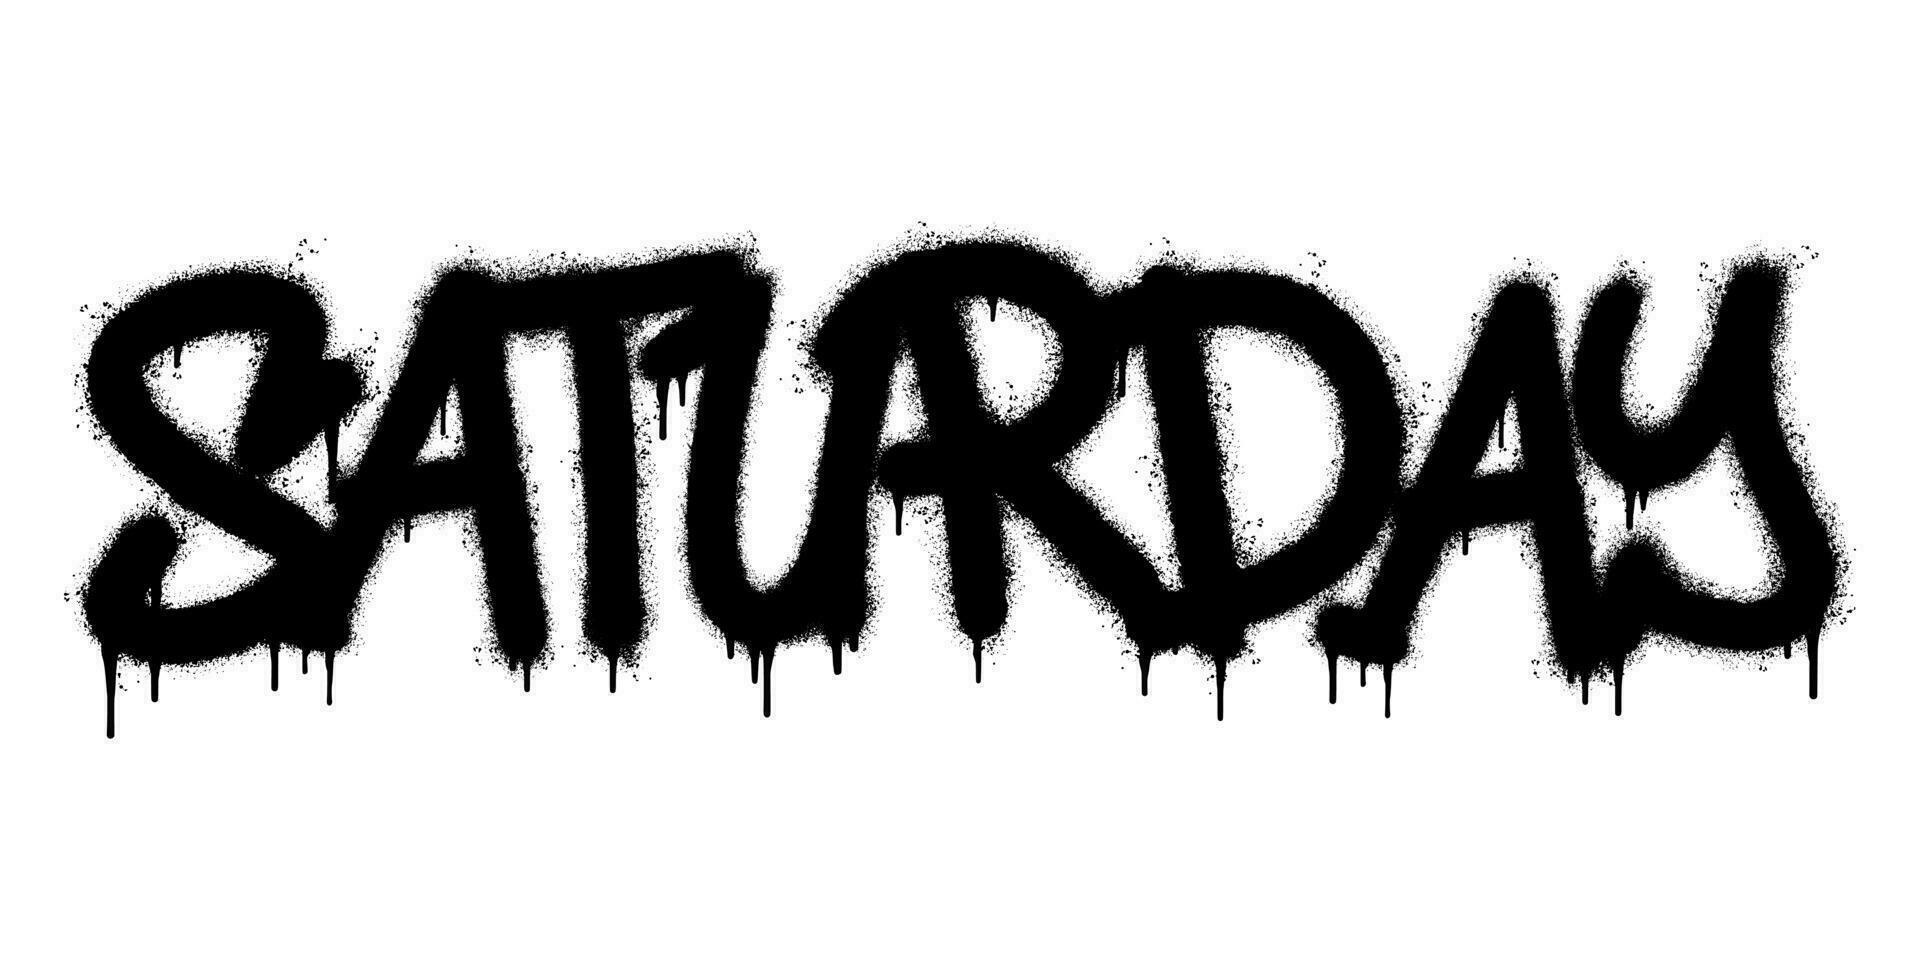 Spray Painted Graffiti Saturday Word Sprayed isolated with a white background. graffiti font Saturday with over spray in black over white. vector